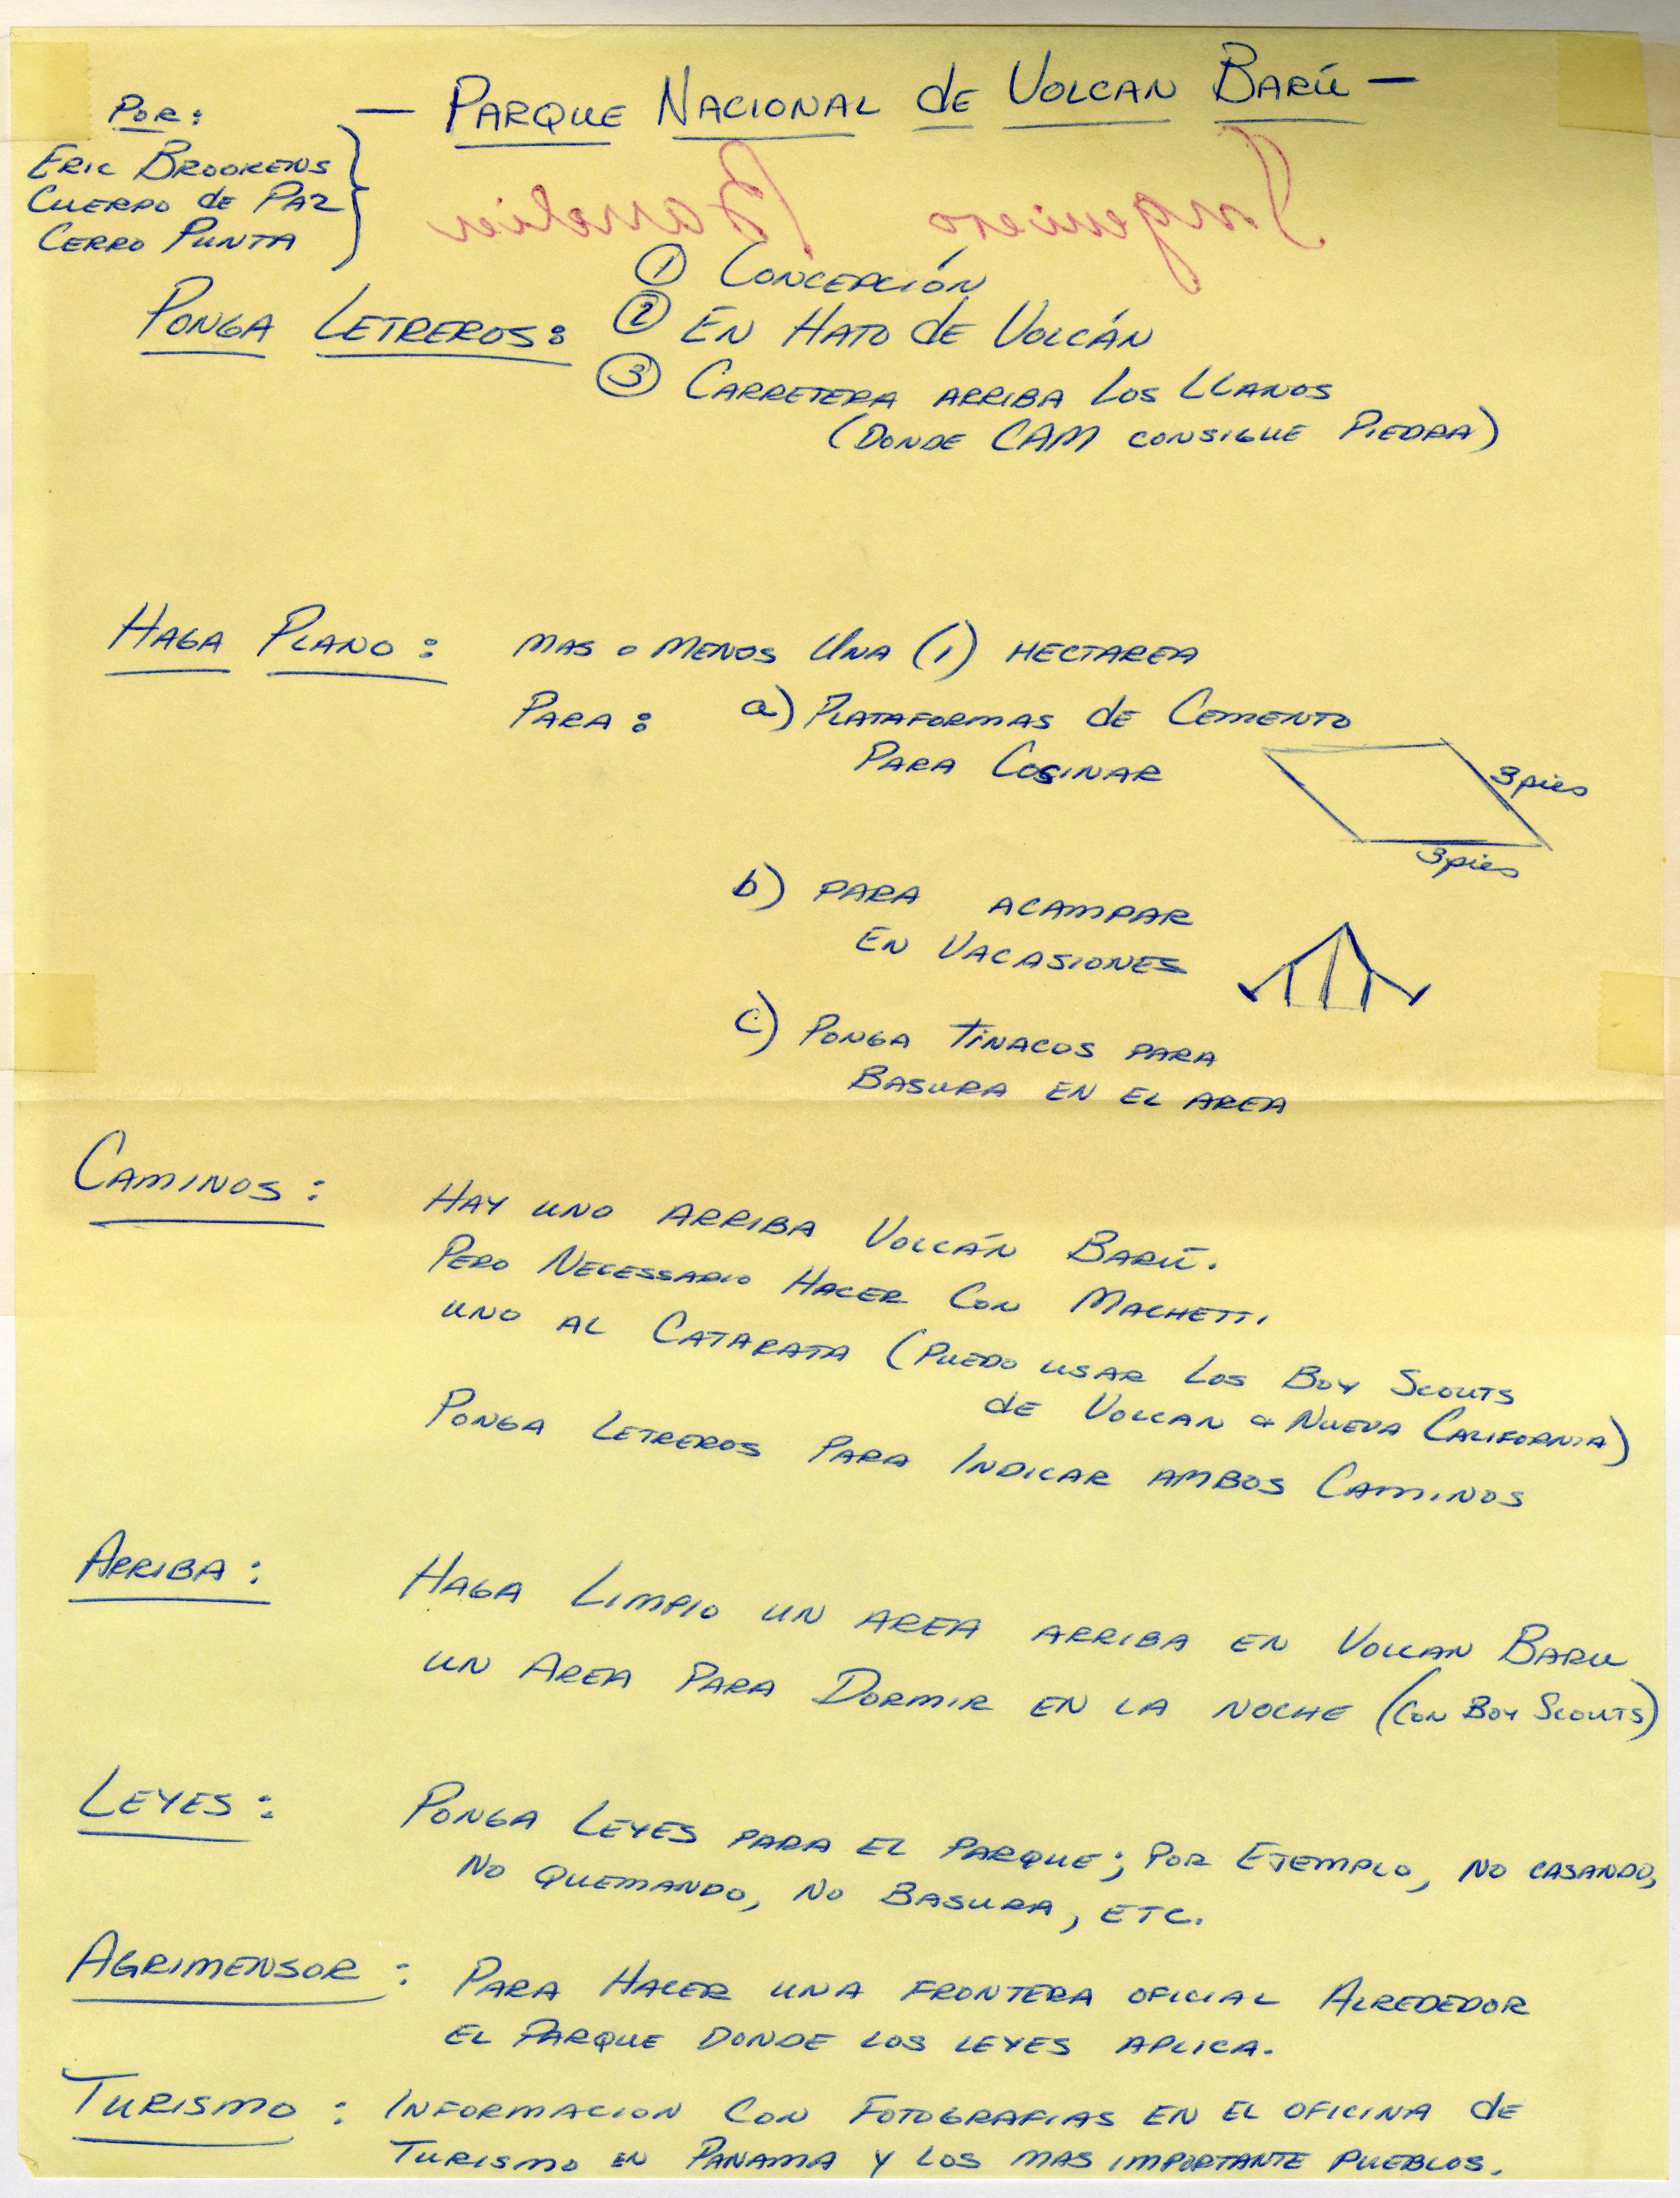 Yellow sheet of paper with plans for National Park in Spanish